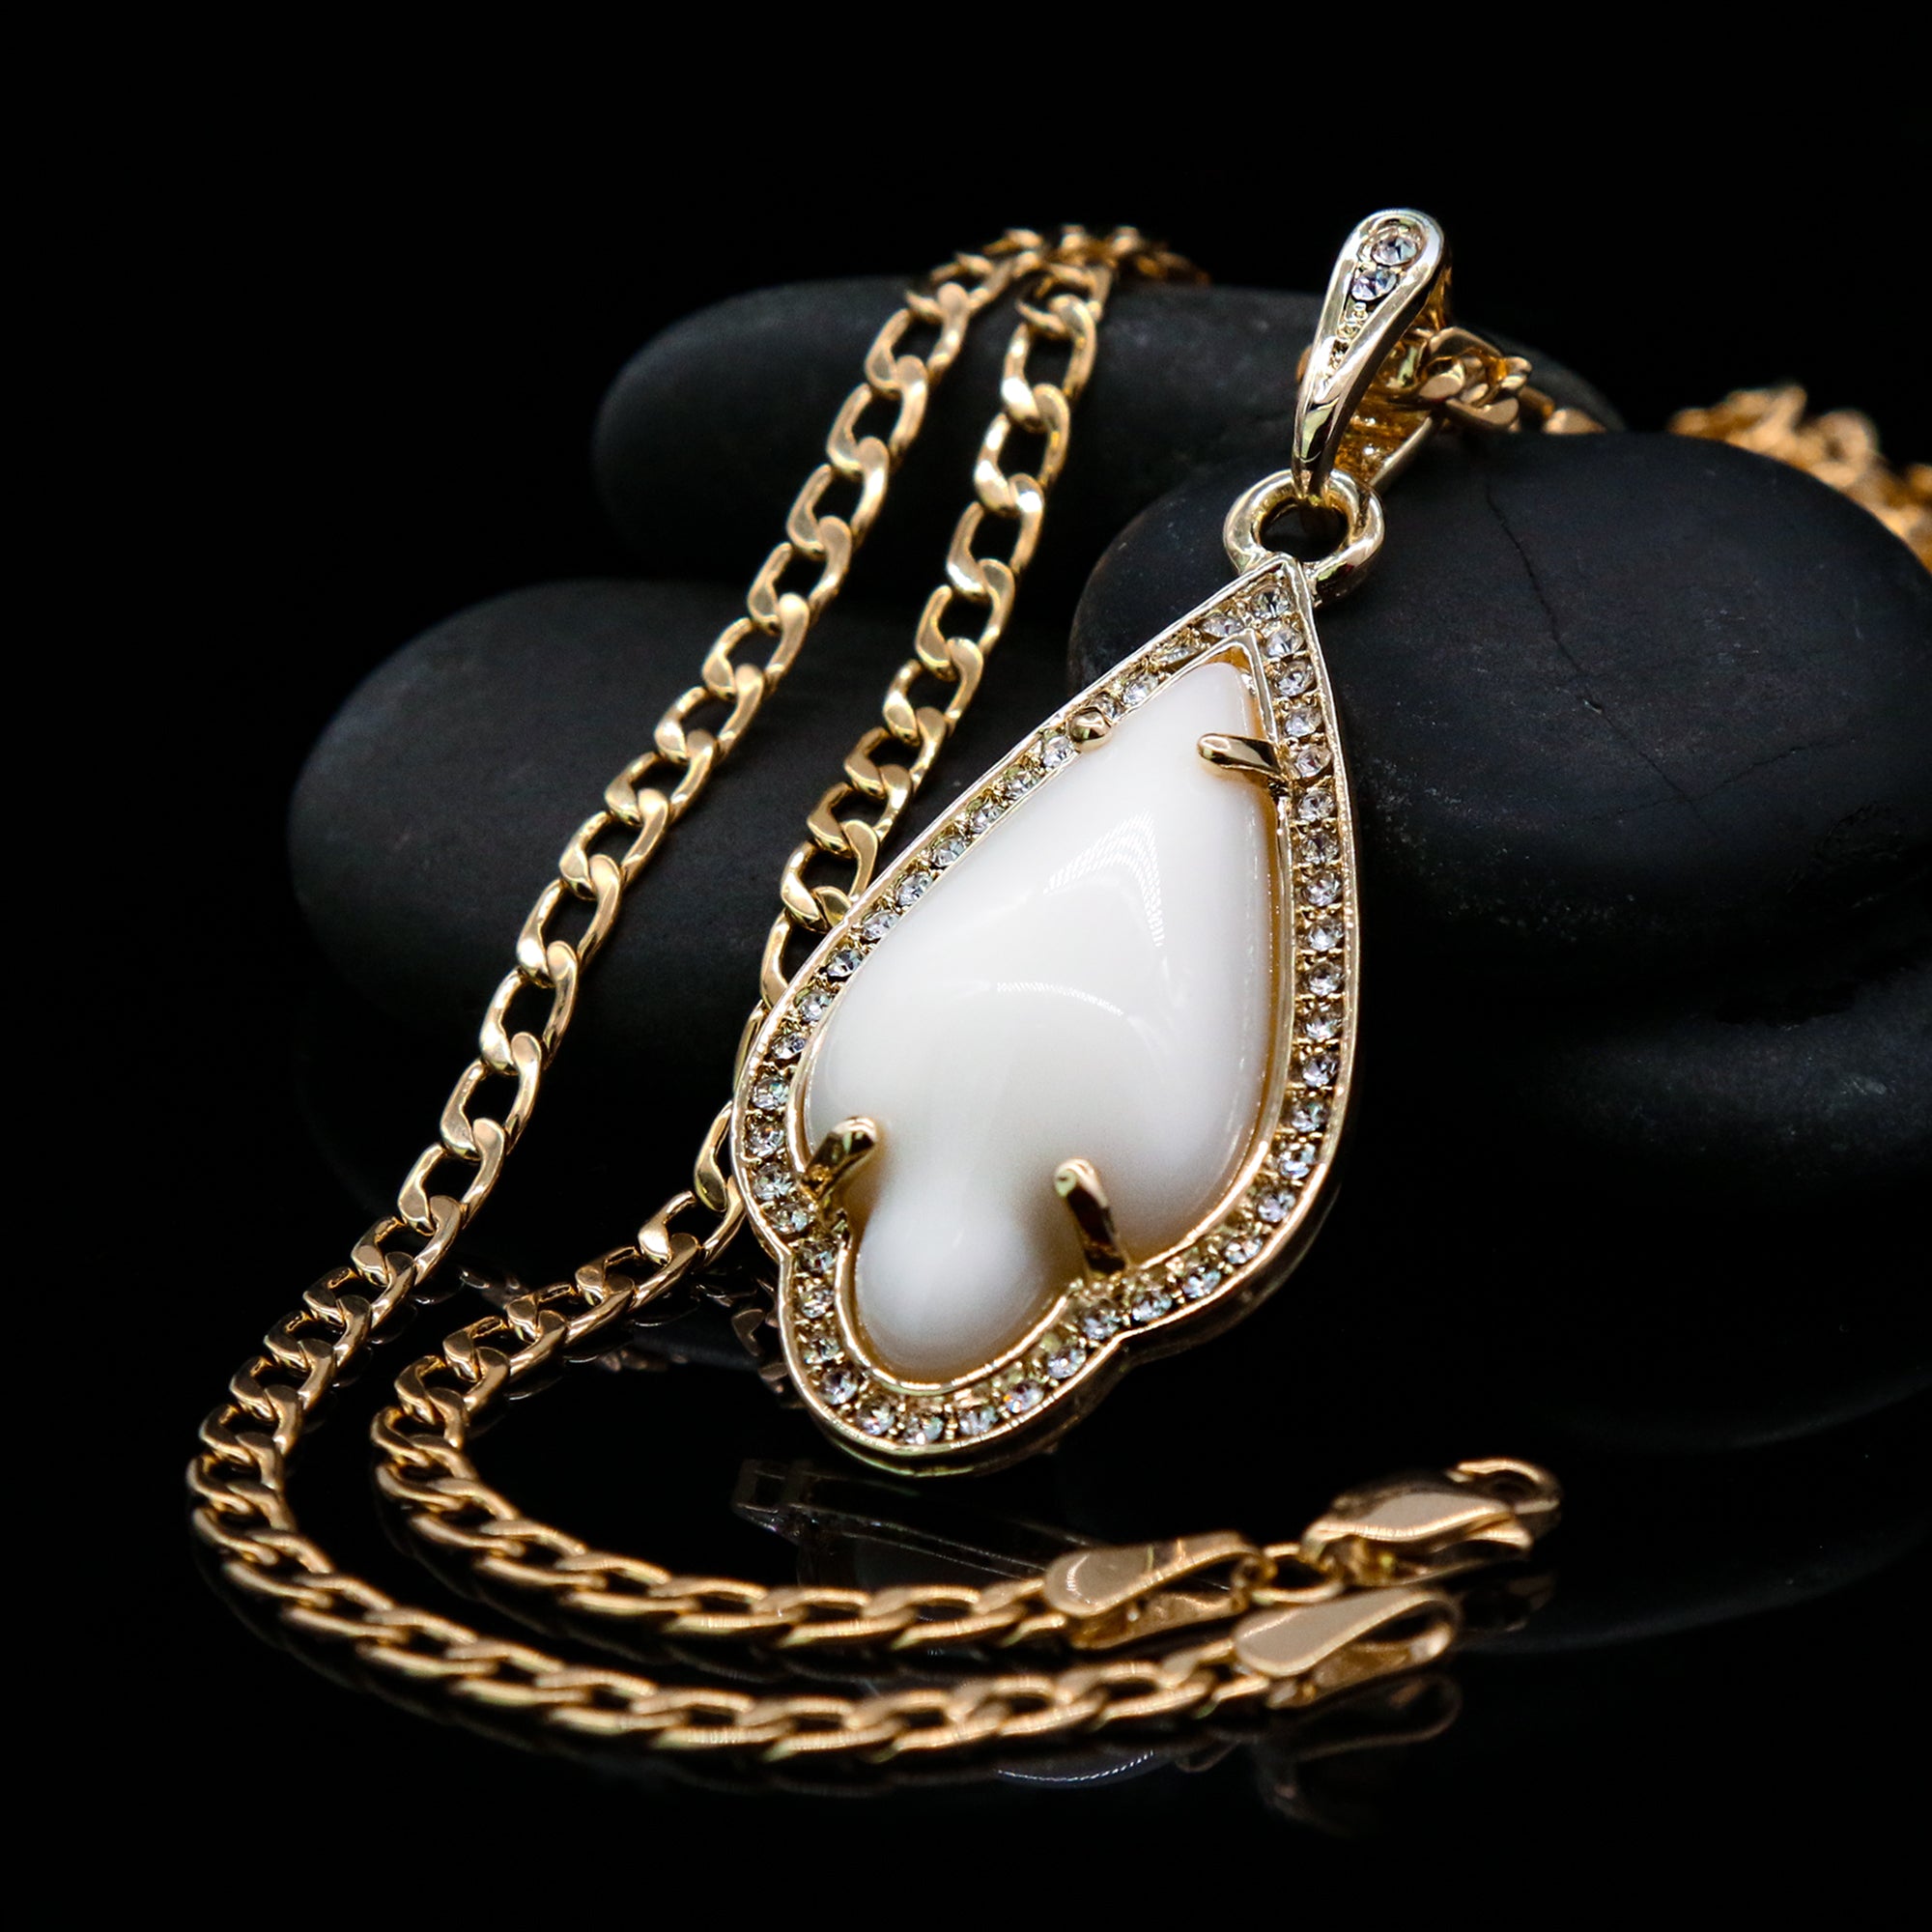 White Curved Tear Women's Jade Chain Pendant Necklace